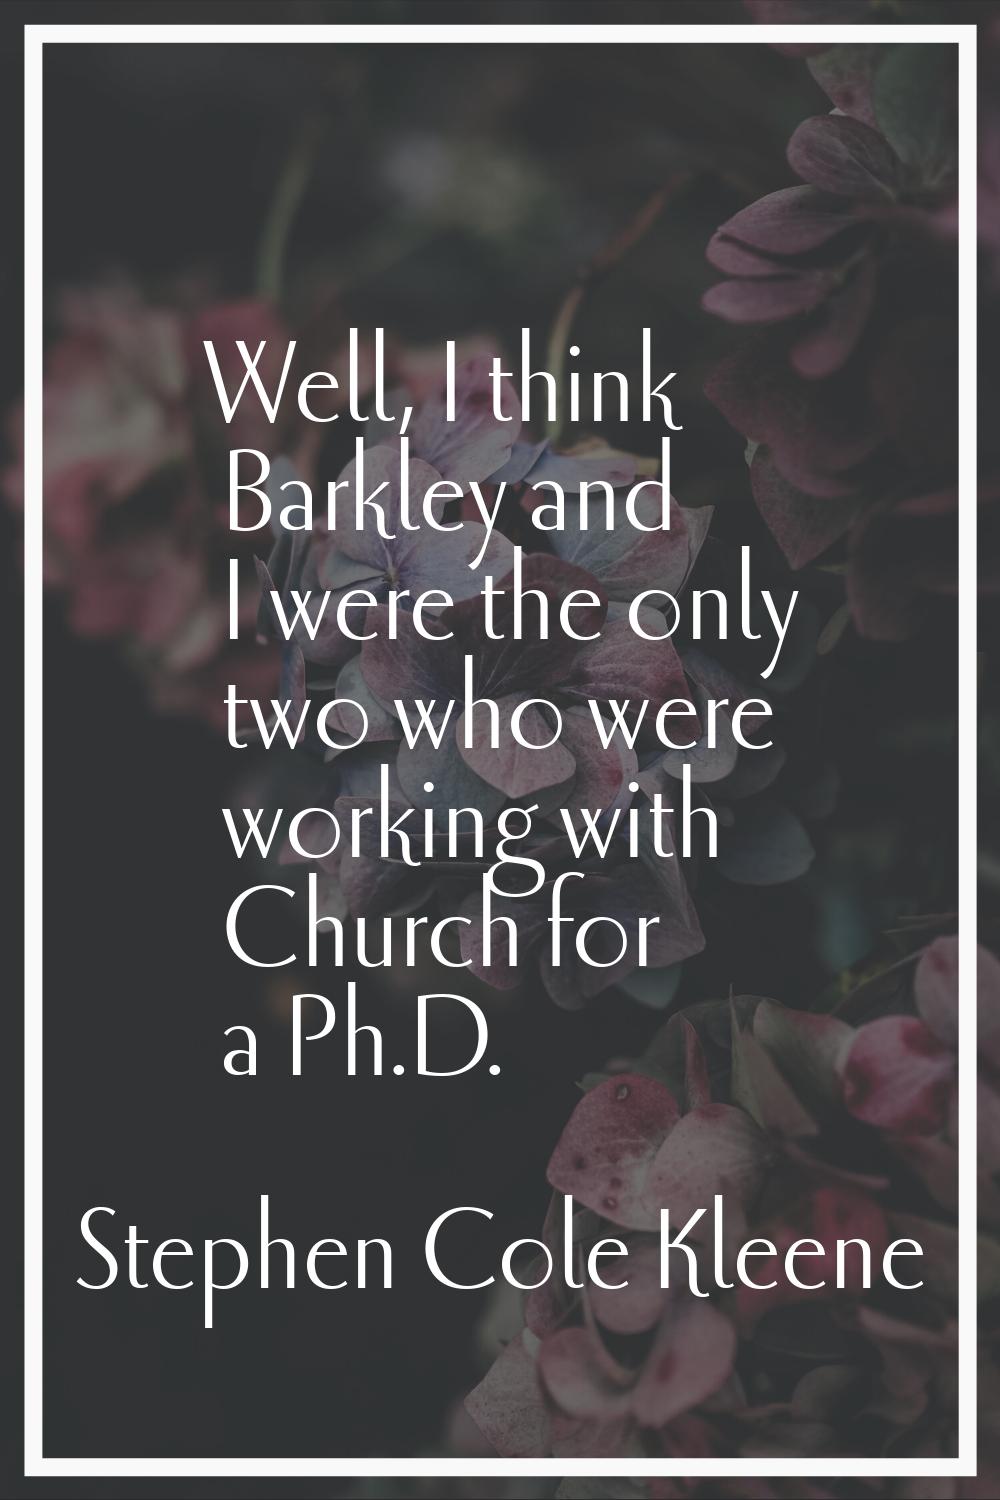 Well, I think Barkley and I were the only two who were working with Church for a Ph.D.